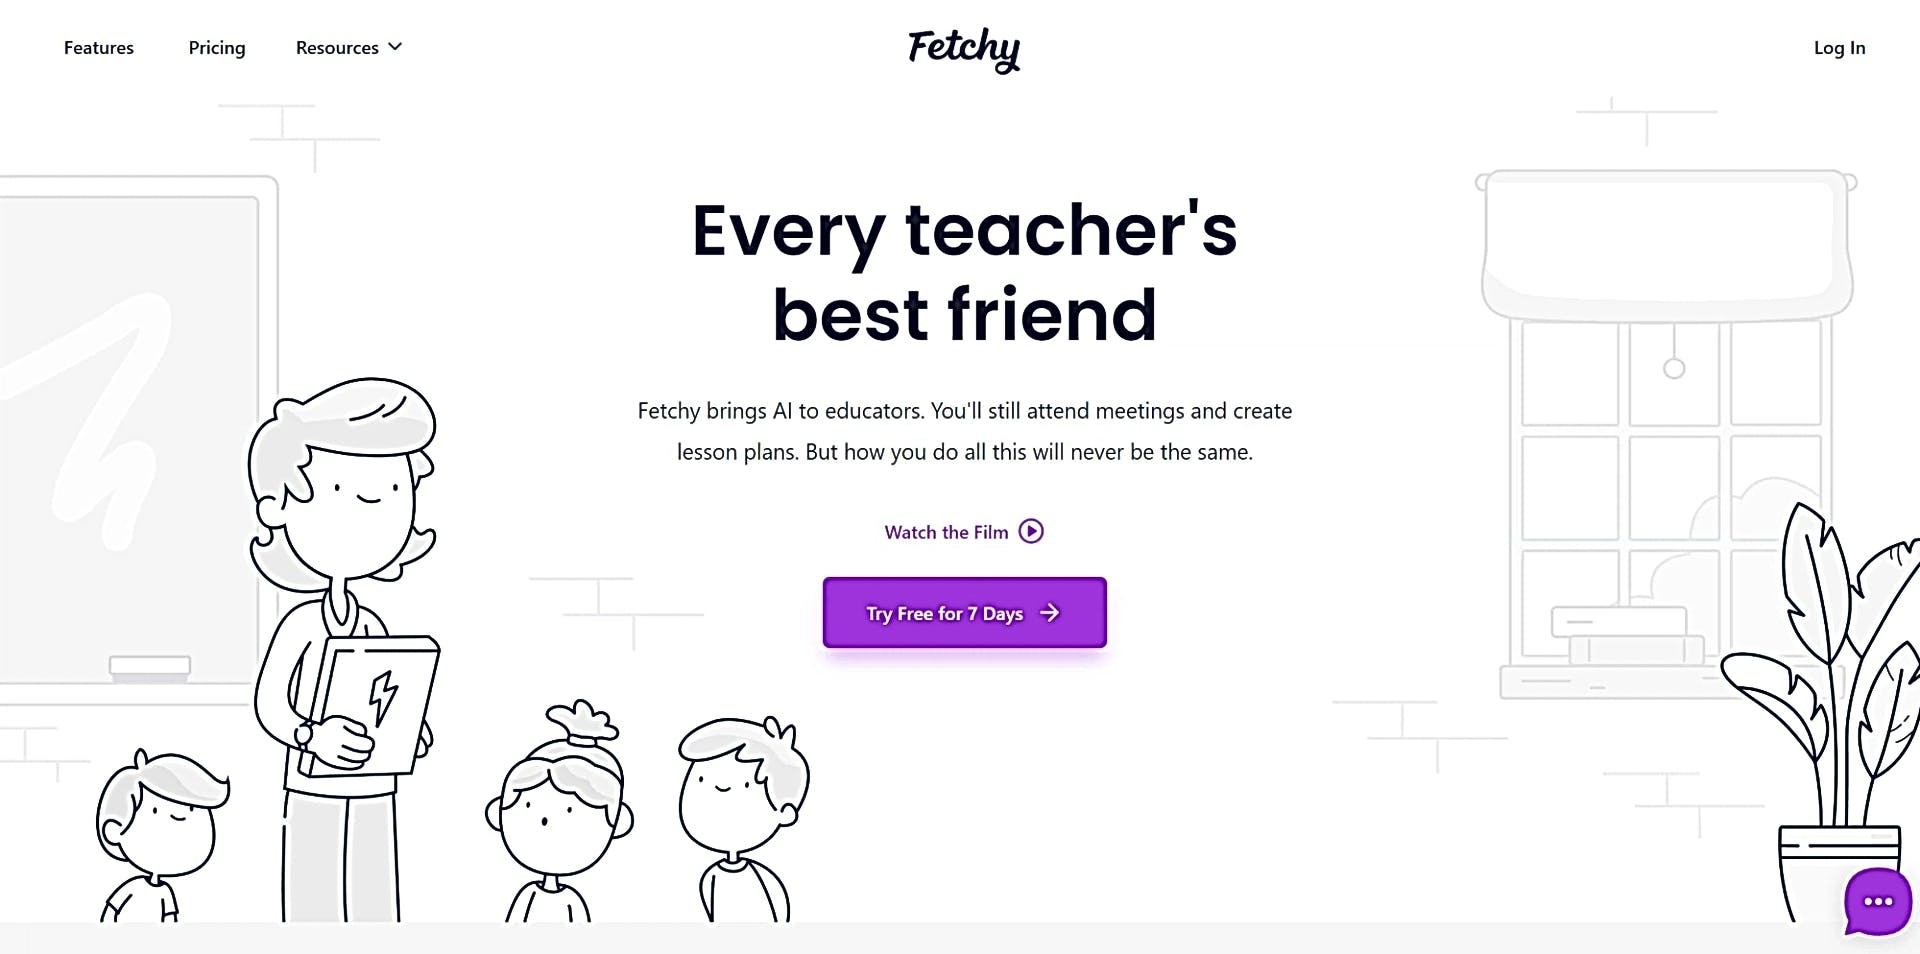 Fetchy featured